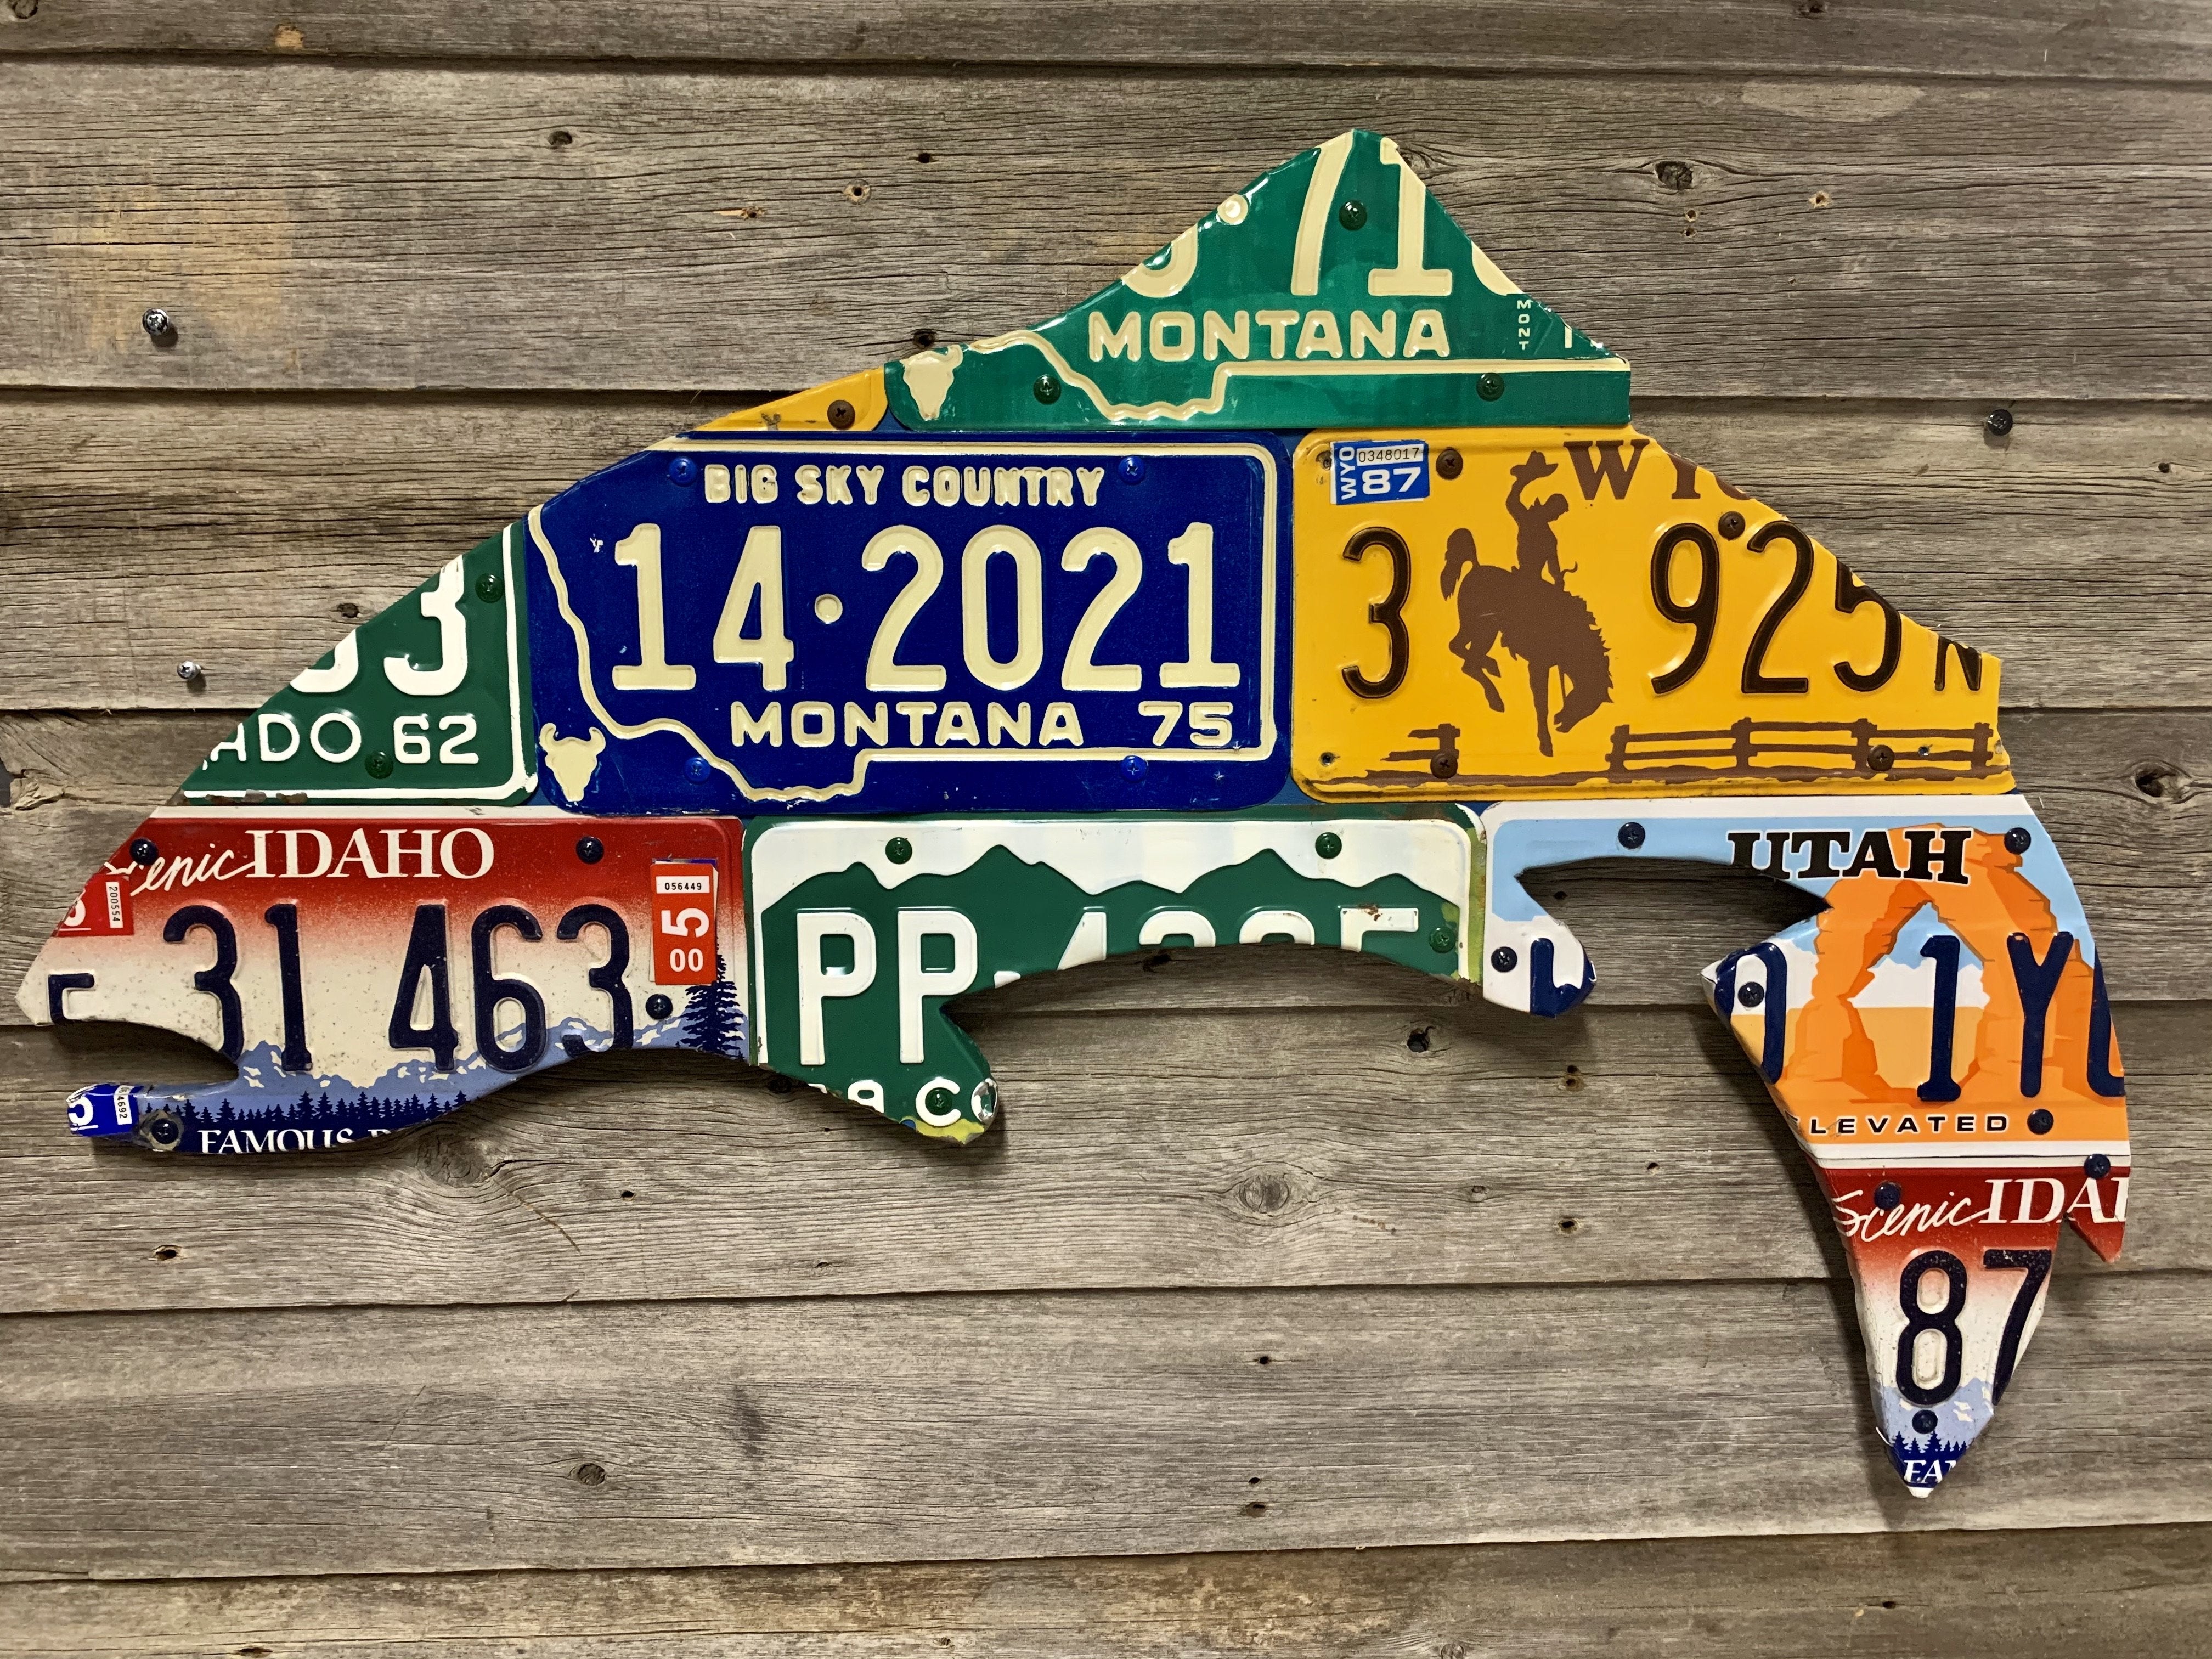 Yellowstone Trout License Plate Art